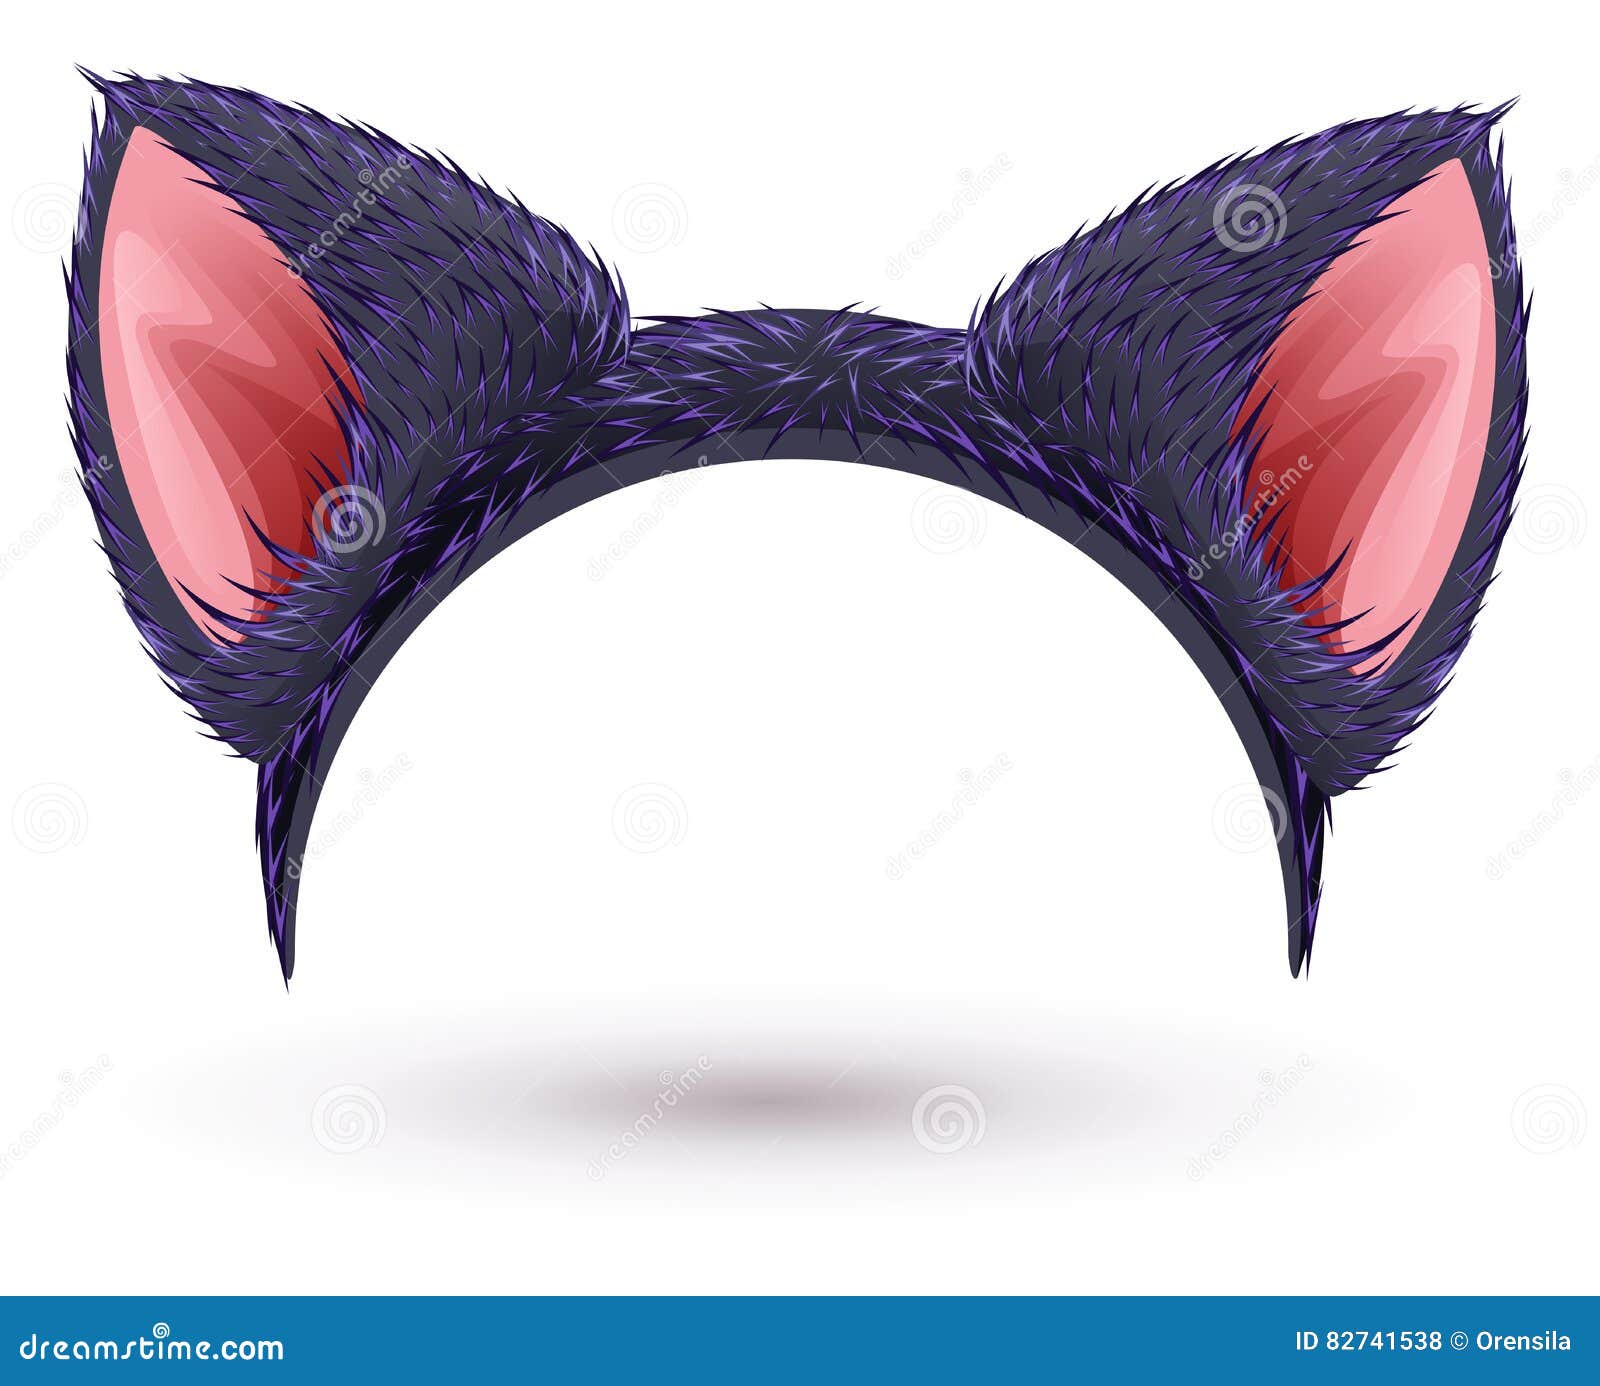 7,400+ Cat Ears Stock Illustrations, Royalty-Free Vector Graphics